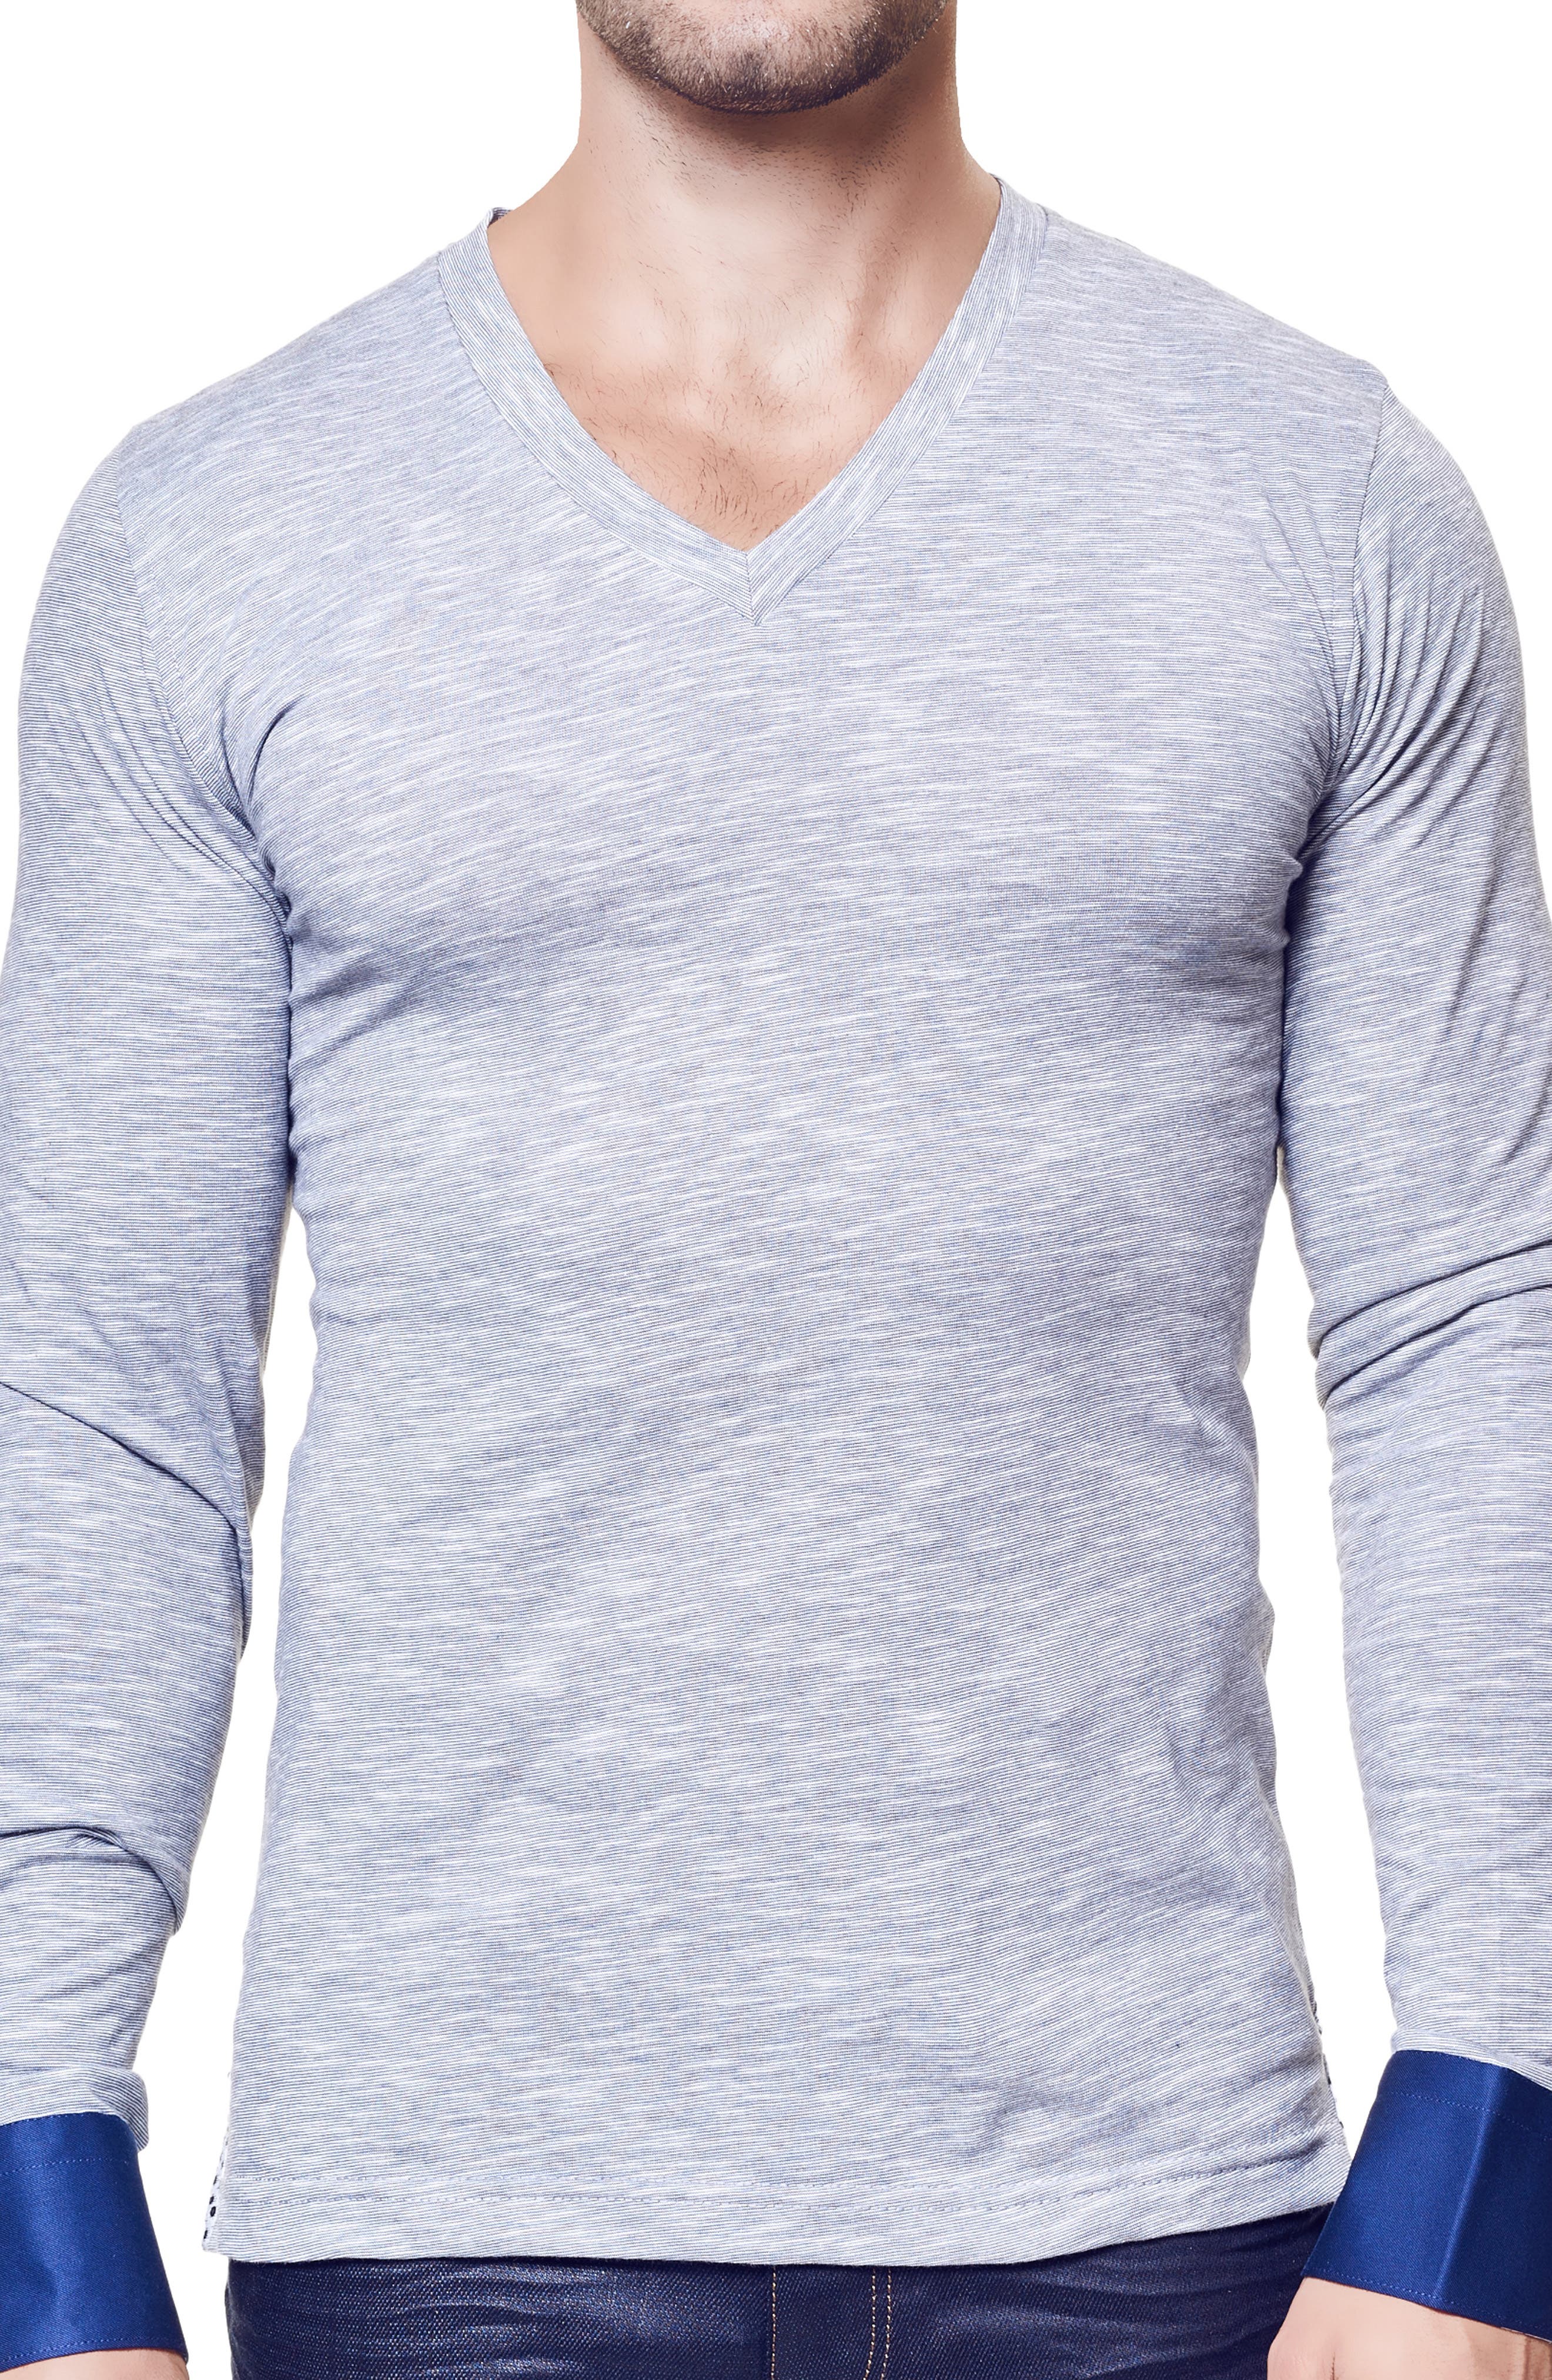 V-Neck Lower East Long-Sleeved Mens Shirts Pack of 5 100% Cotton